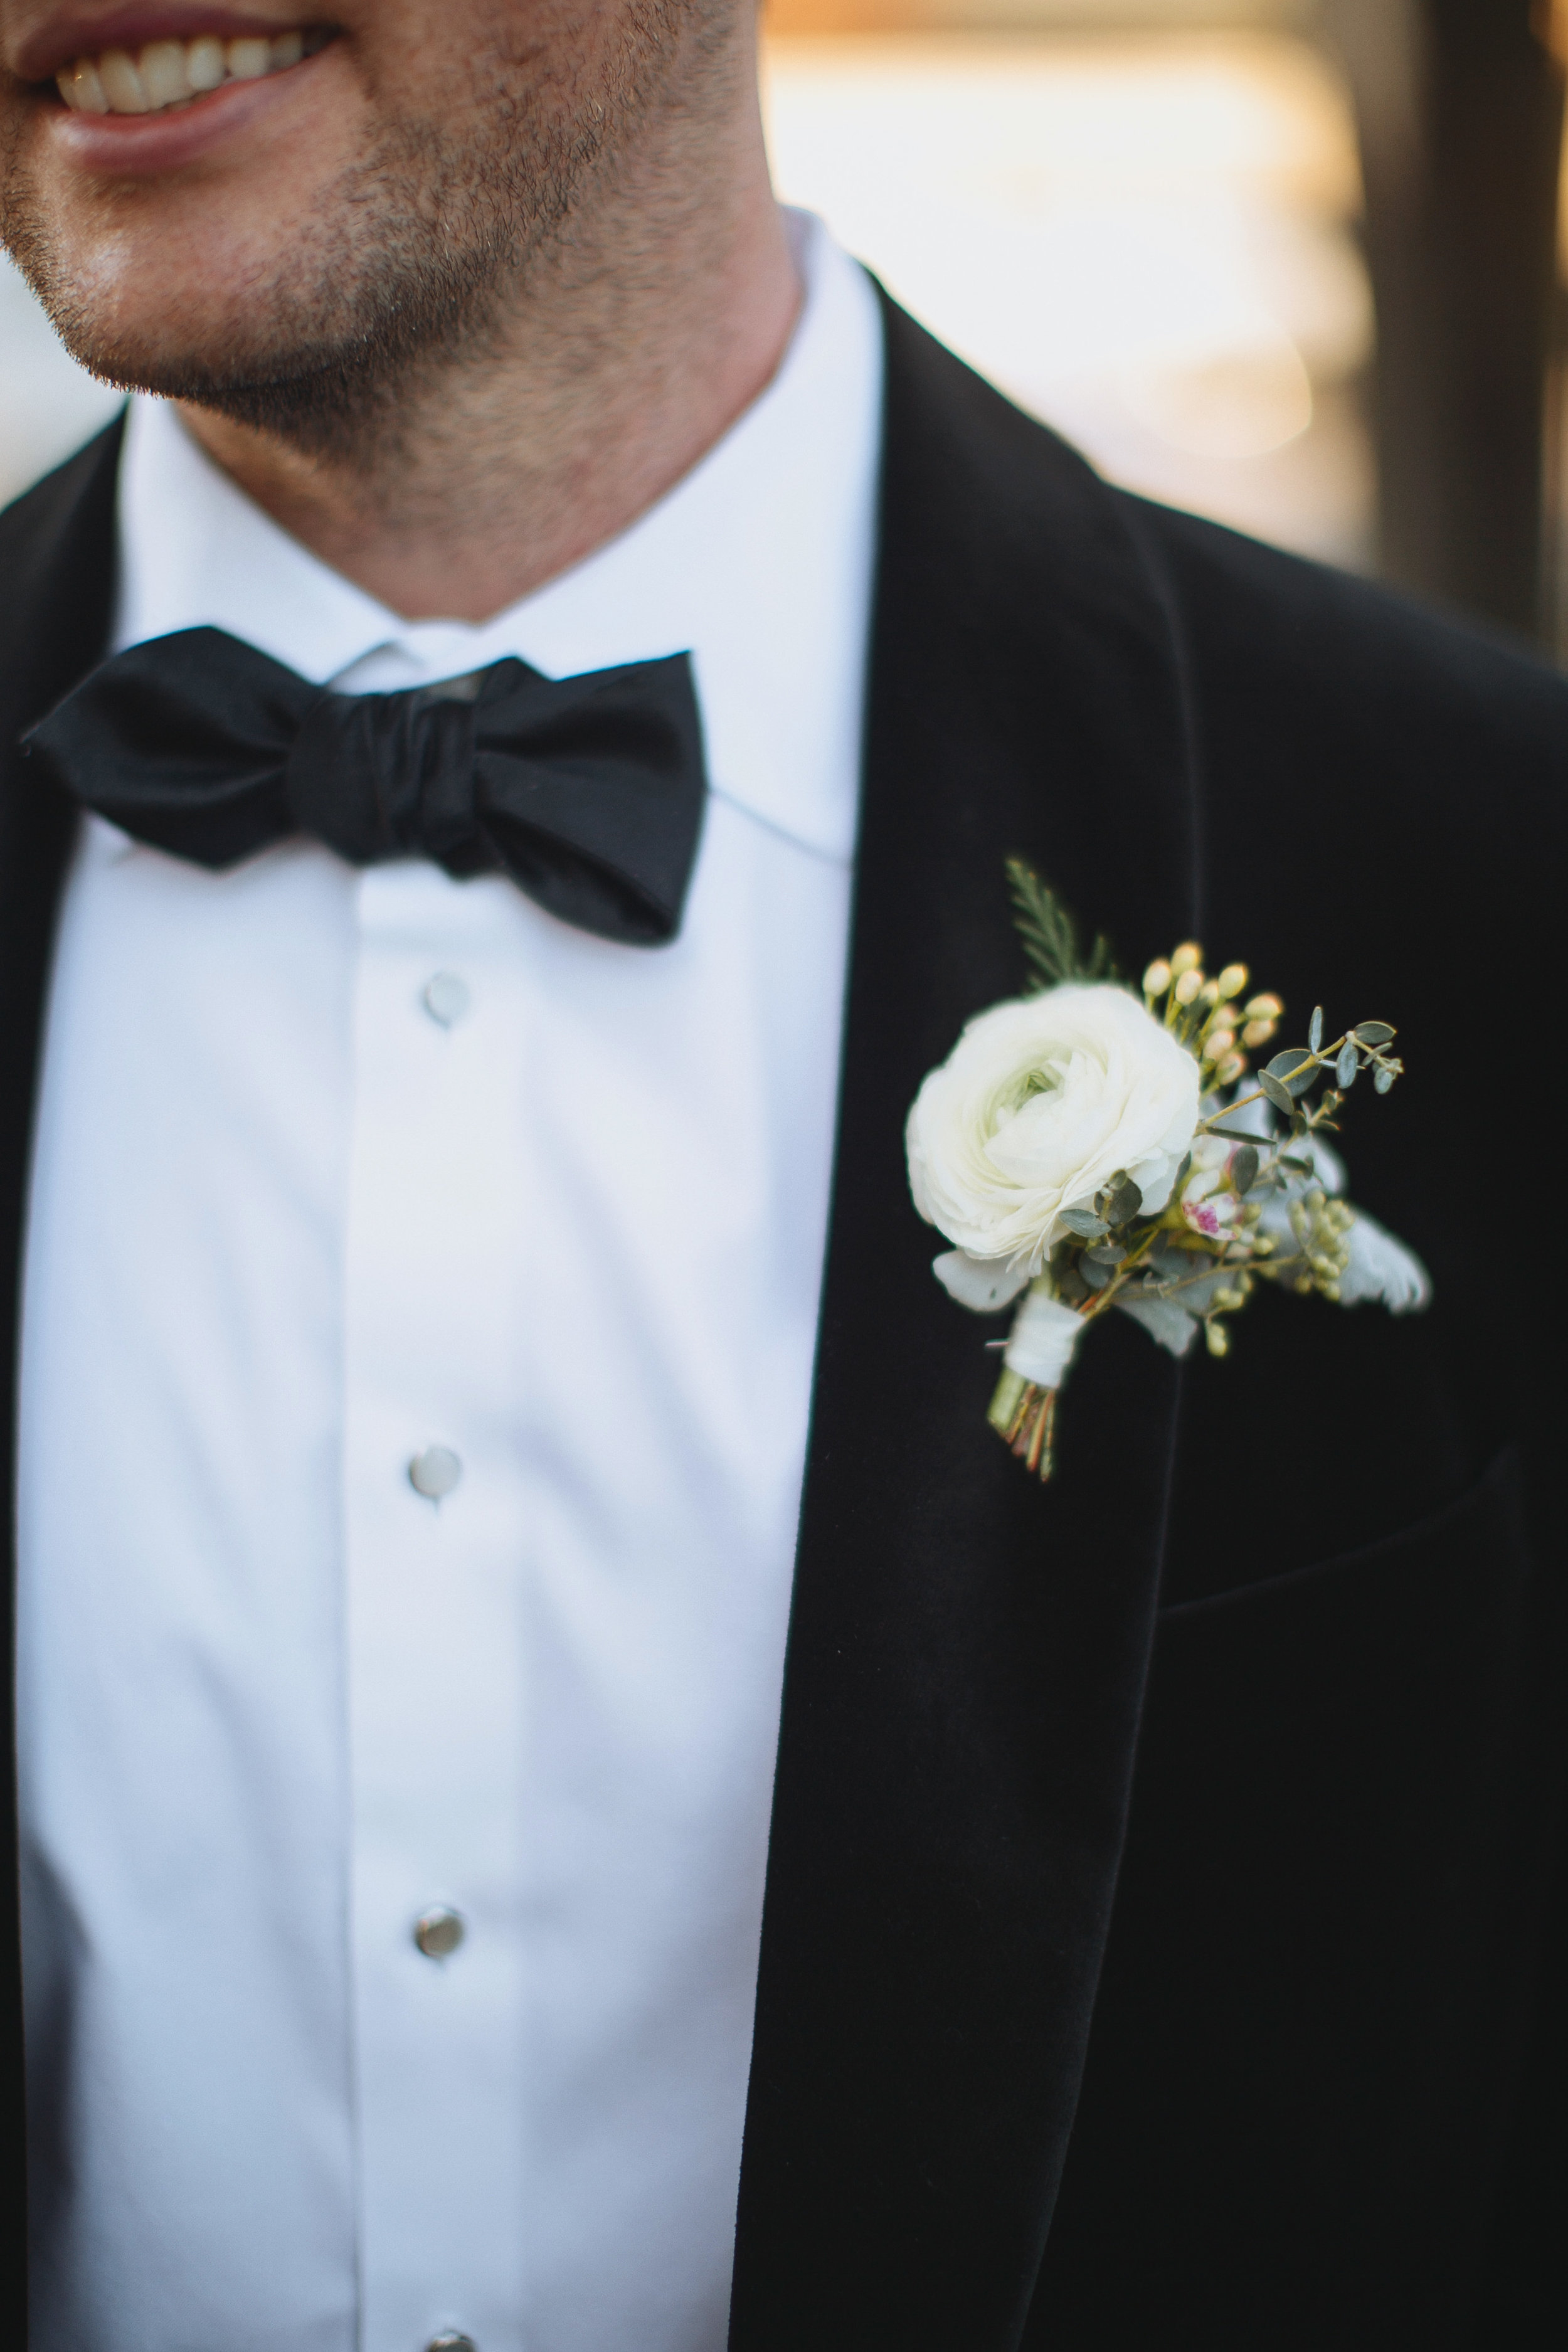 Wintry Boutonniere with evergreen, red berries, and a white ranunculus // Nashville Wedding Flowers